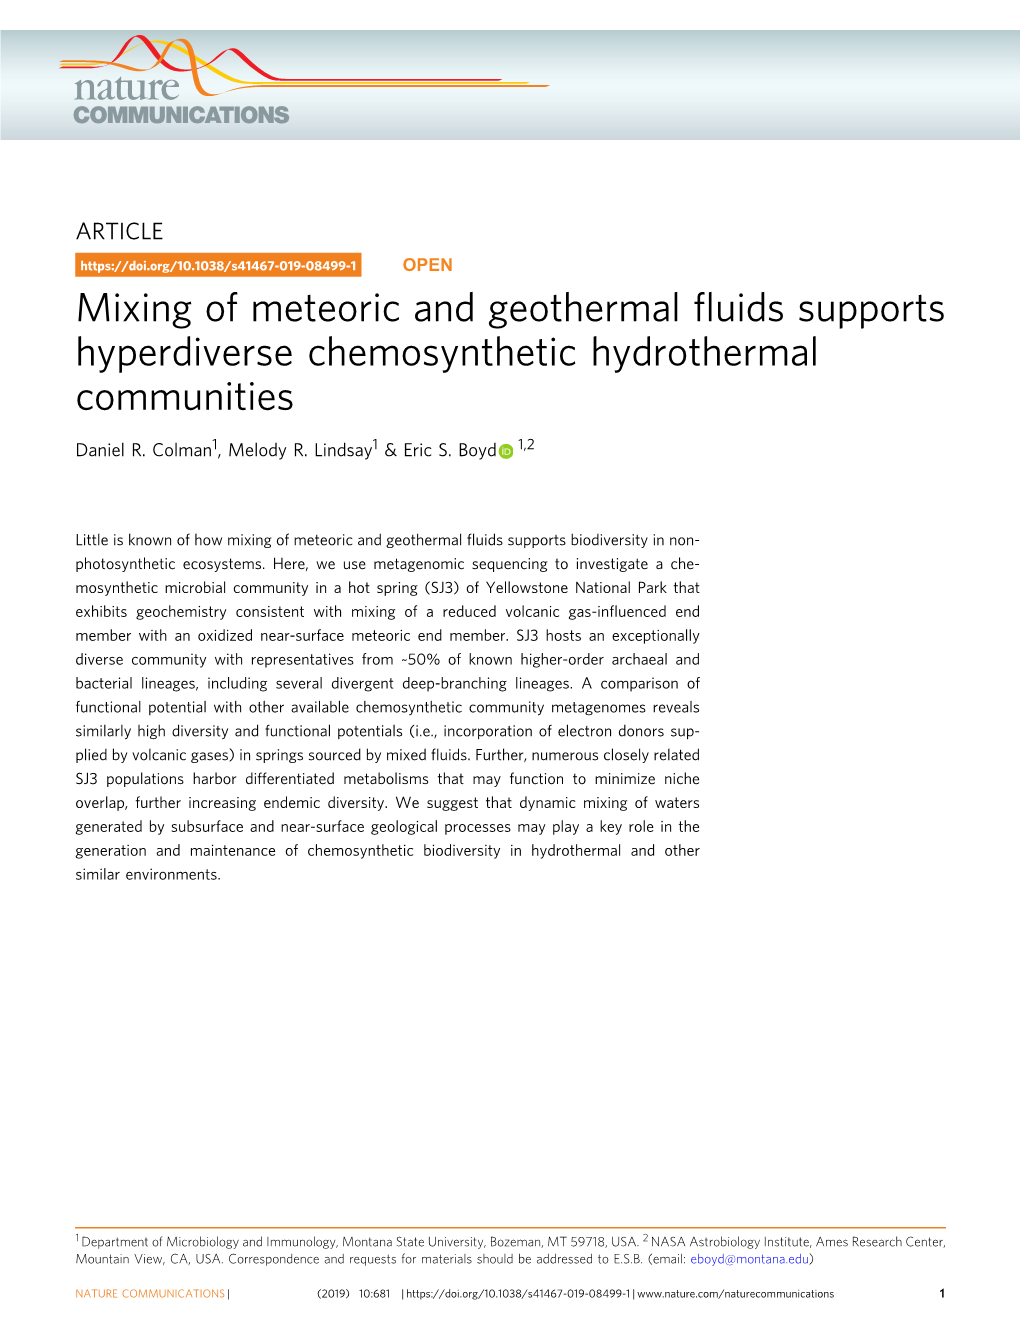 Mixing of Meteoric and Geothermal Fluids Supports Hyperdiverse